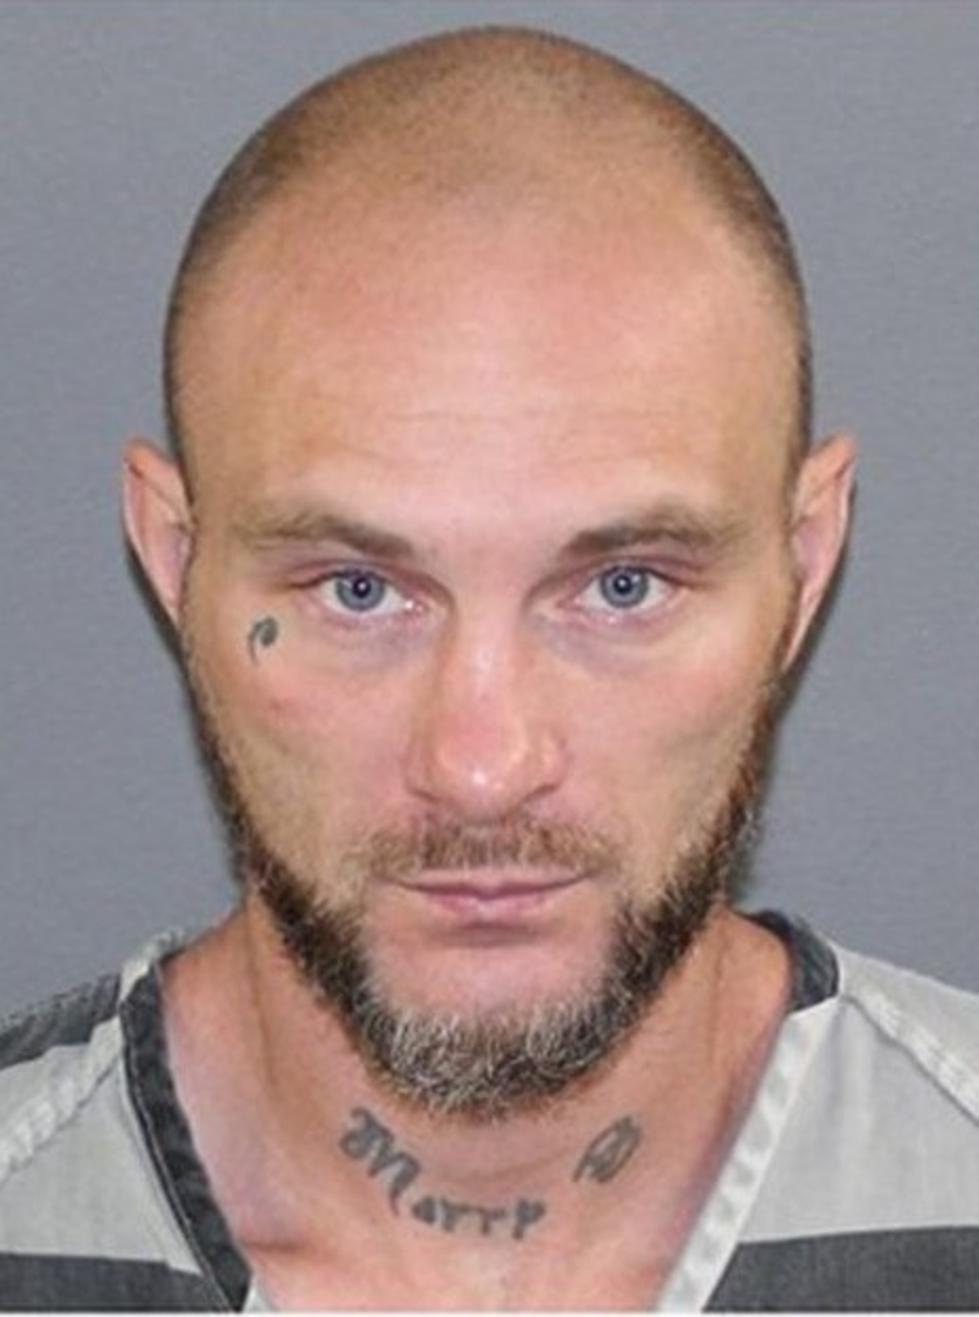 IL Man Gives Cops Fake Name, His Real Name is Tattooed on His Neck